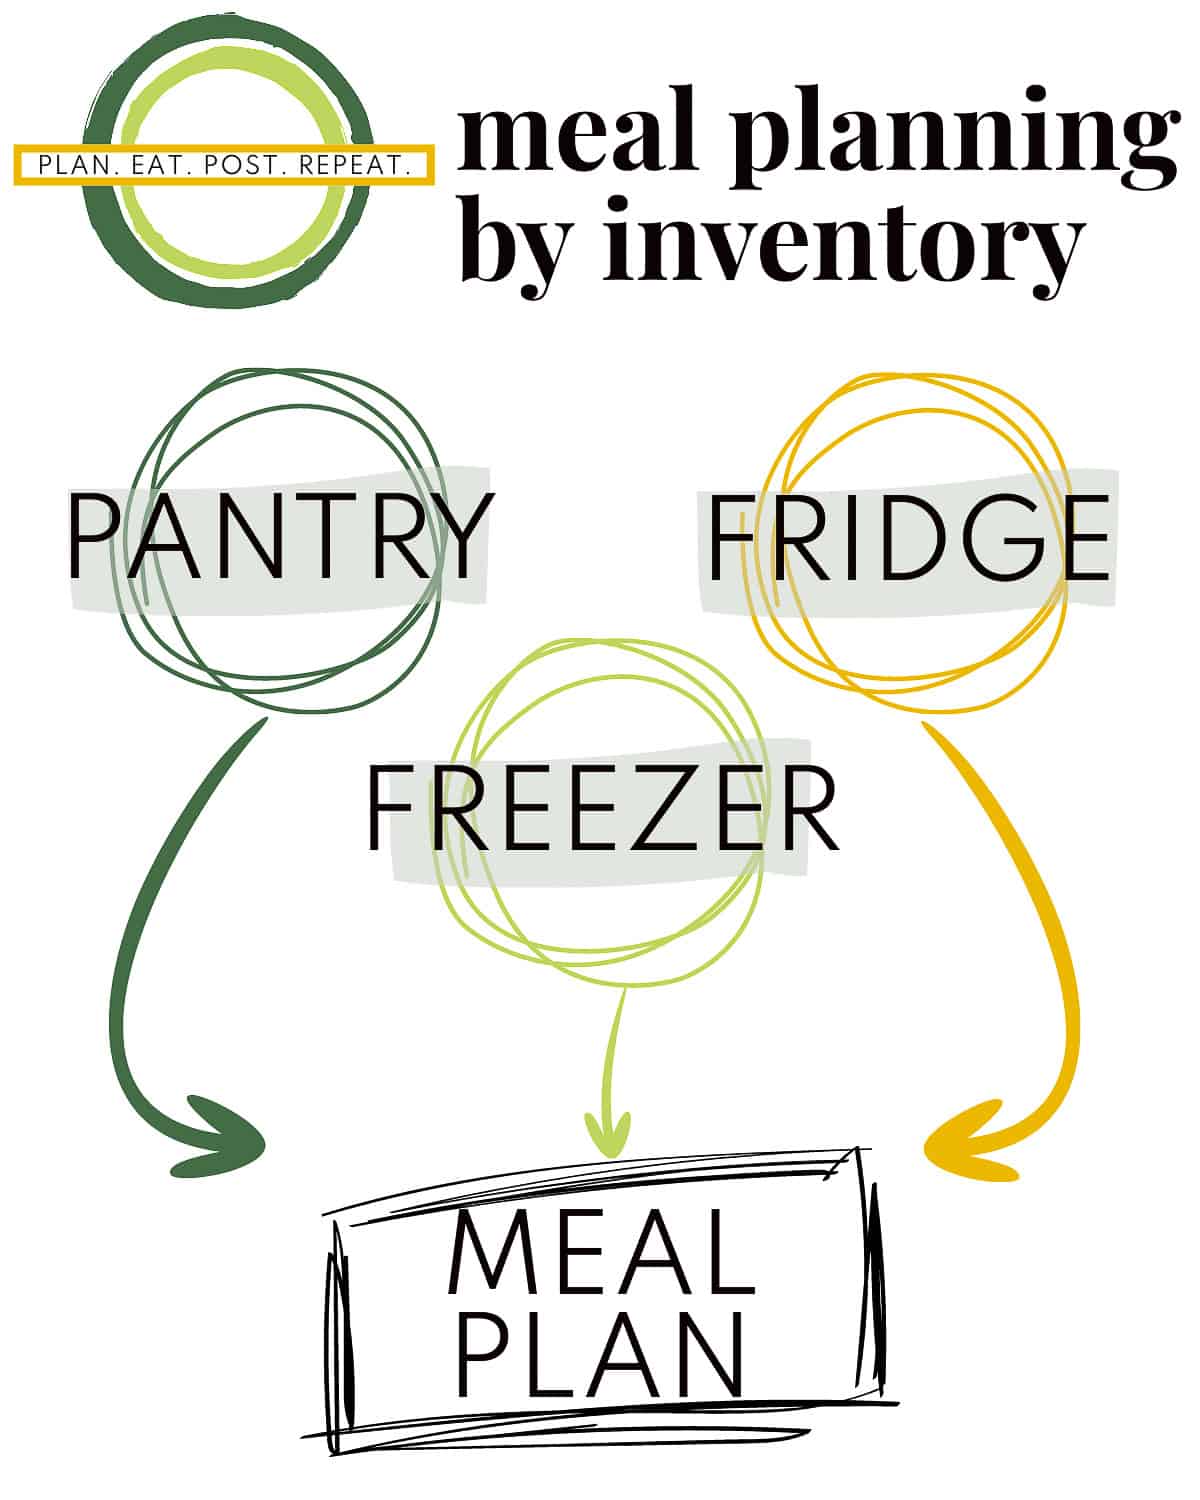 a graphic summarizing creating a meal plan using the inventory framework.